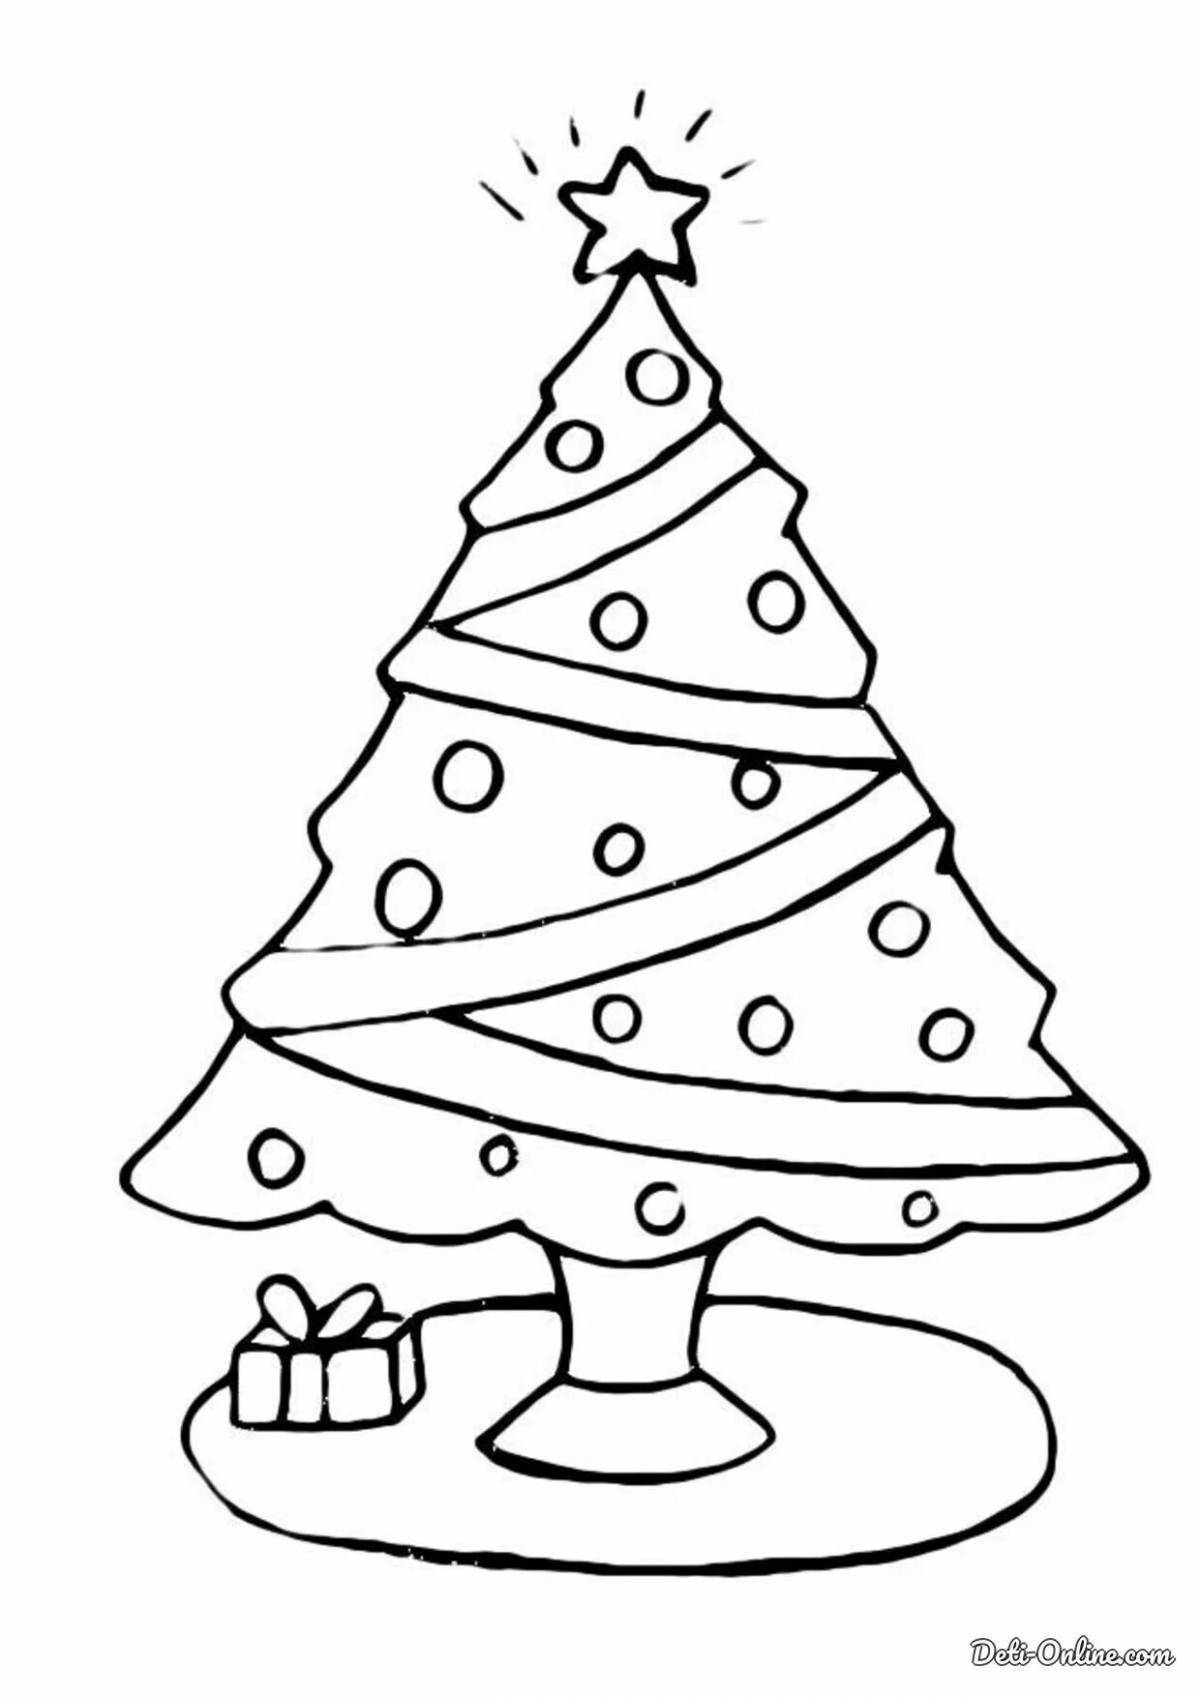 An enthusiastic drawing of a Christmas tree